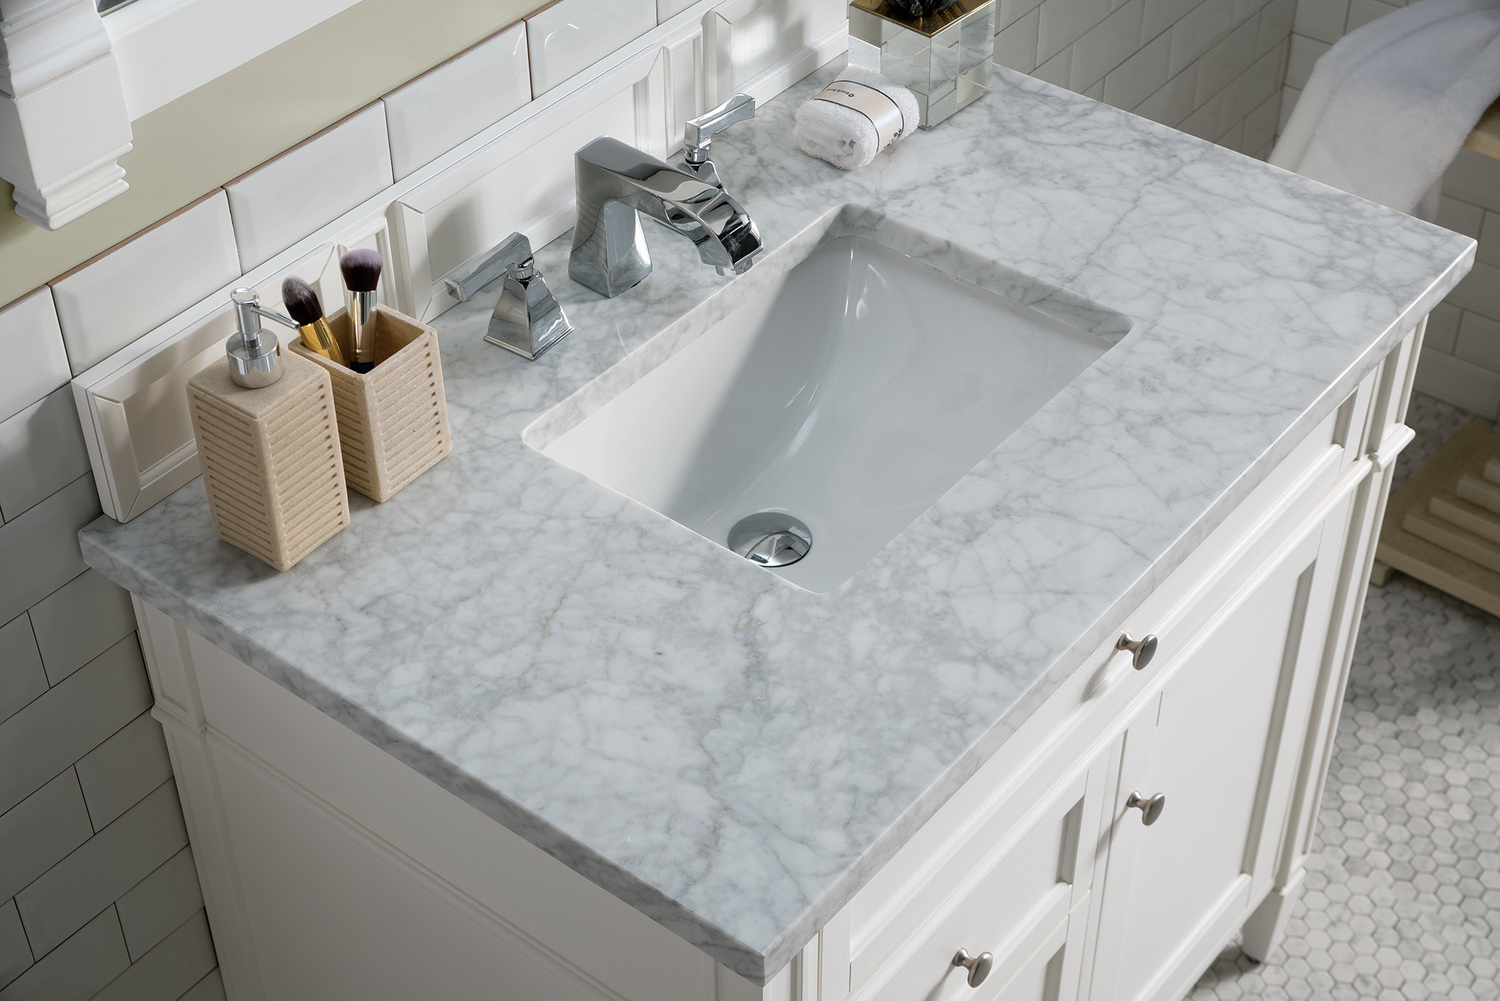 40 inch vanity top with sink James Martin Vanity Bright White Transitional